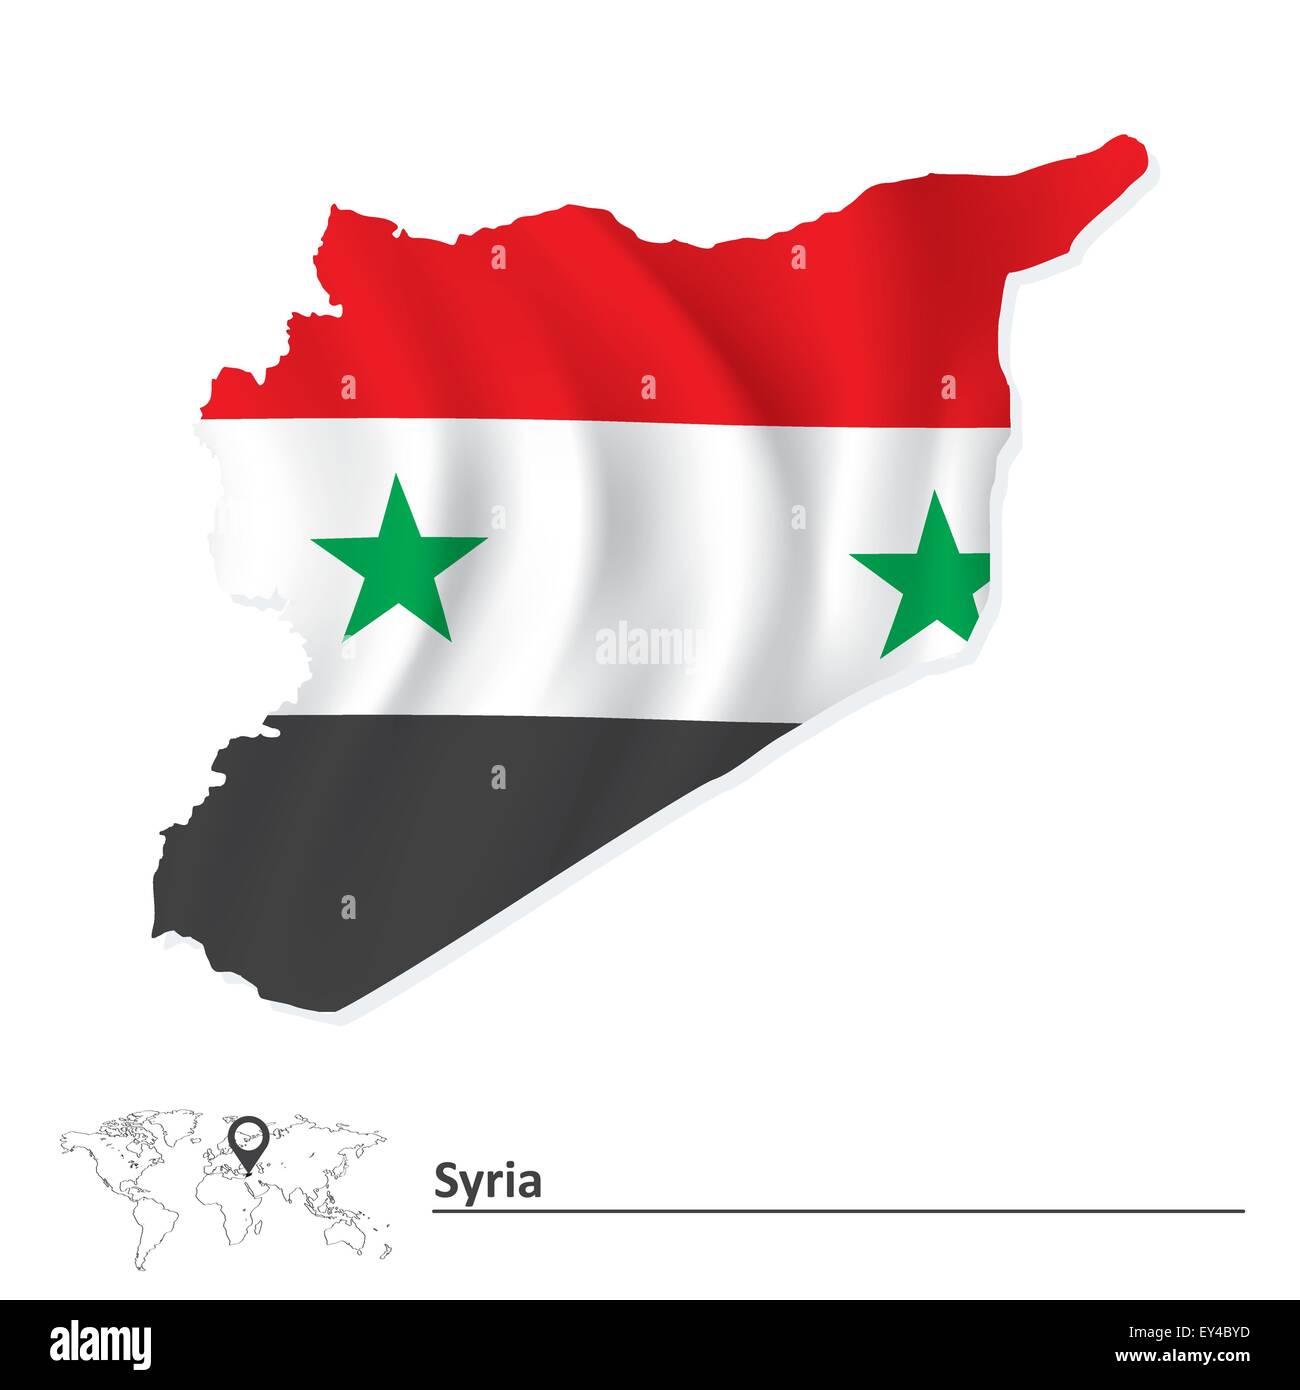 Map of Syria with flag - vector illustration Stock Vector